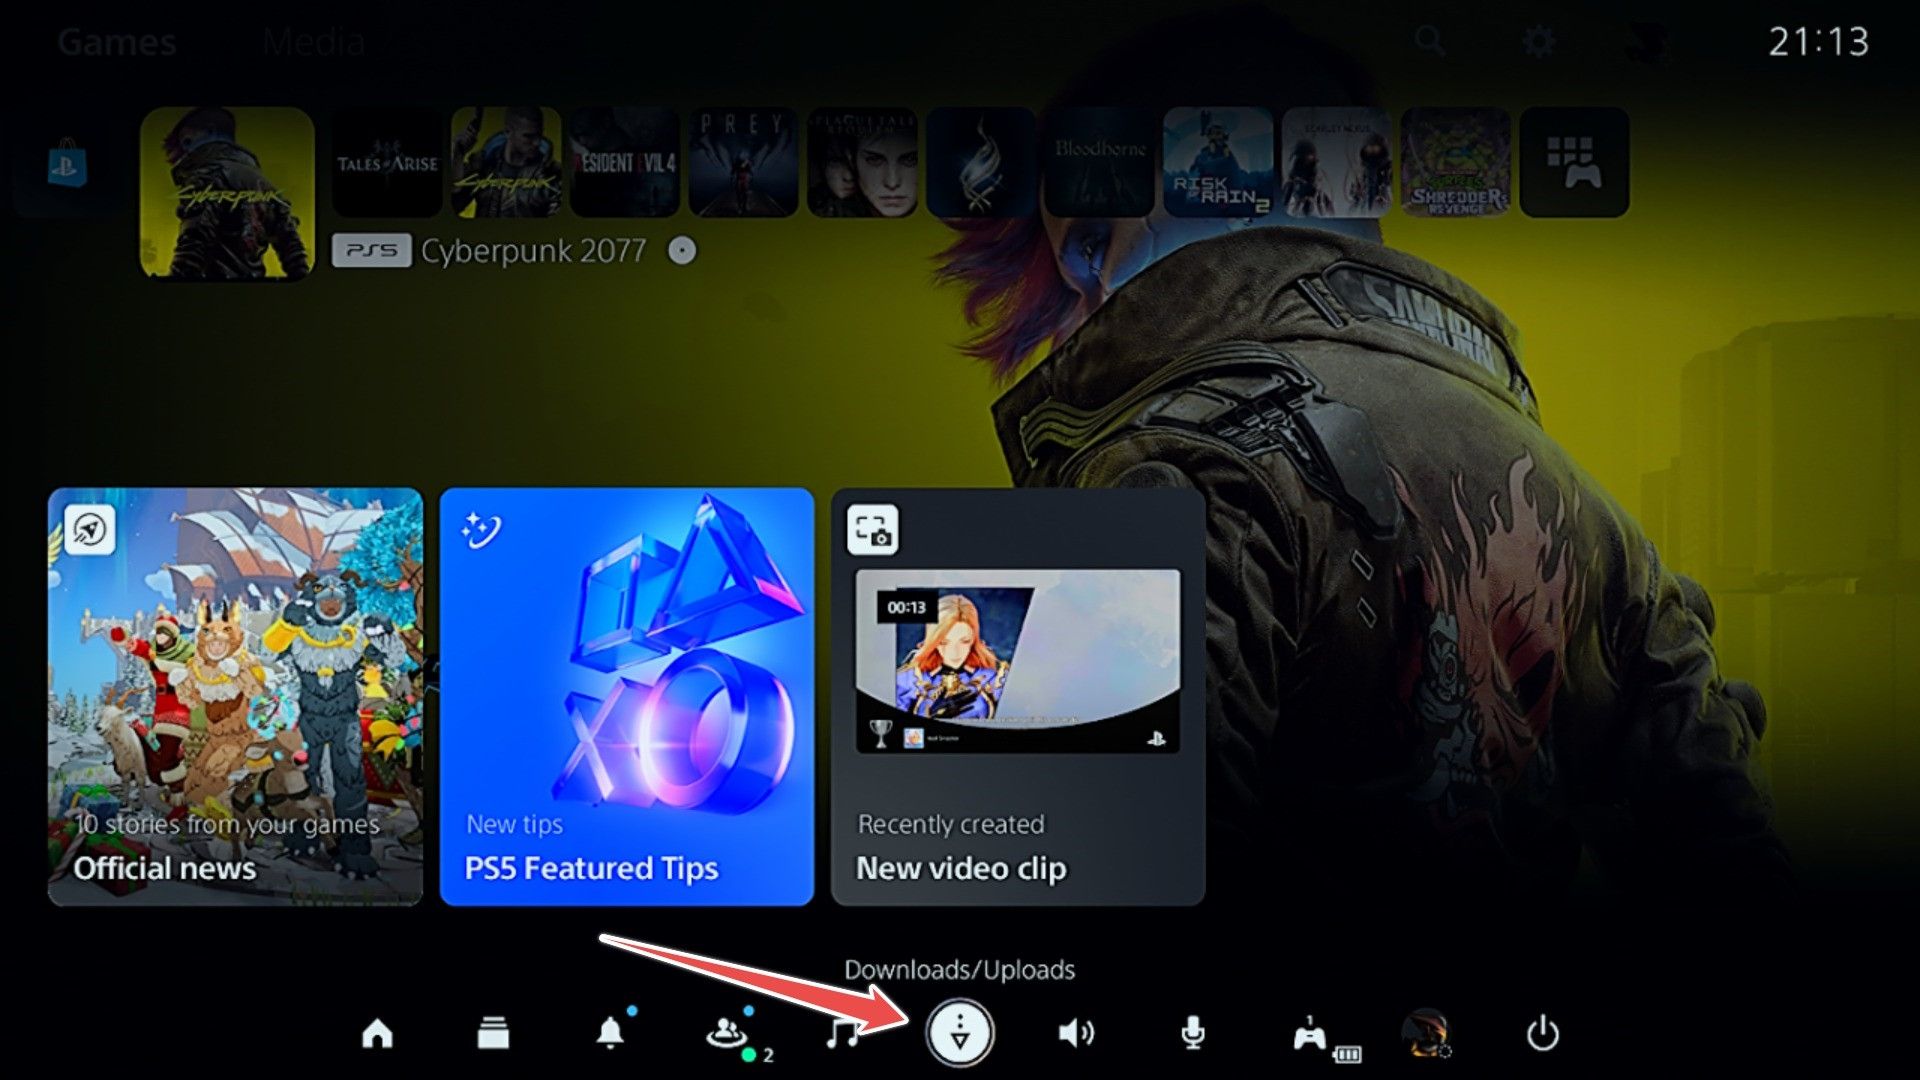 The 'Downloads/Uploads' icon in the PS5 control center.